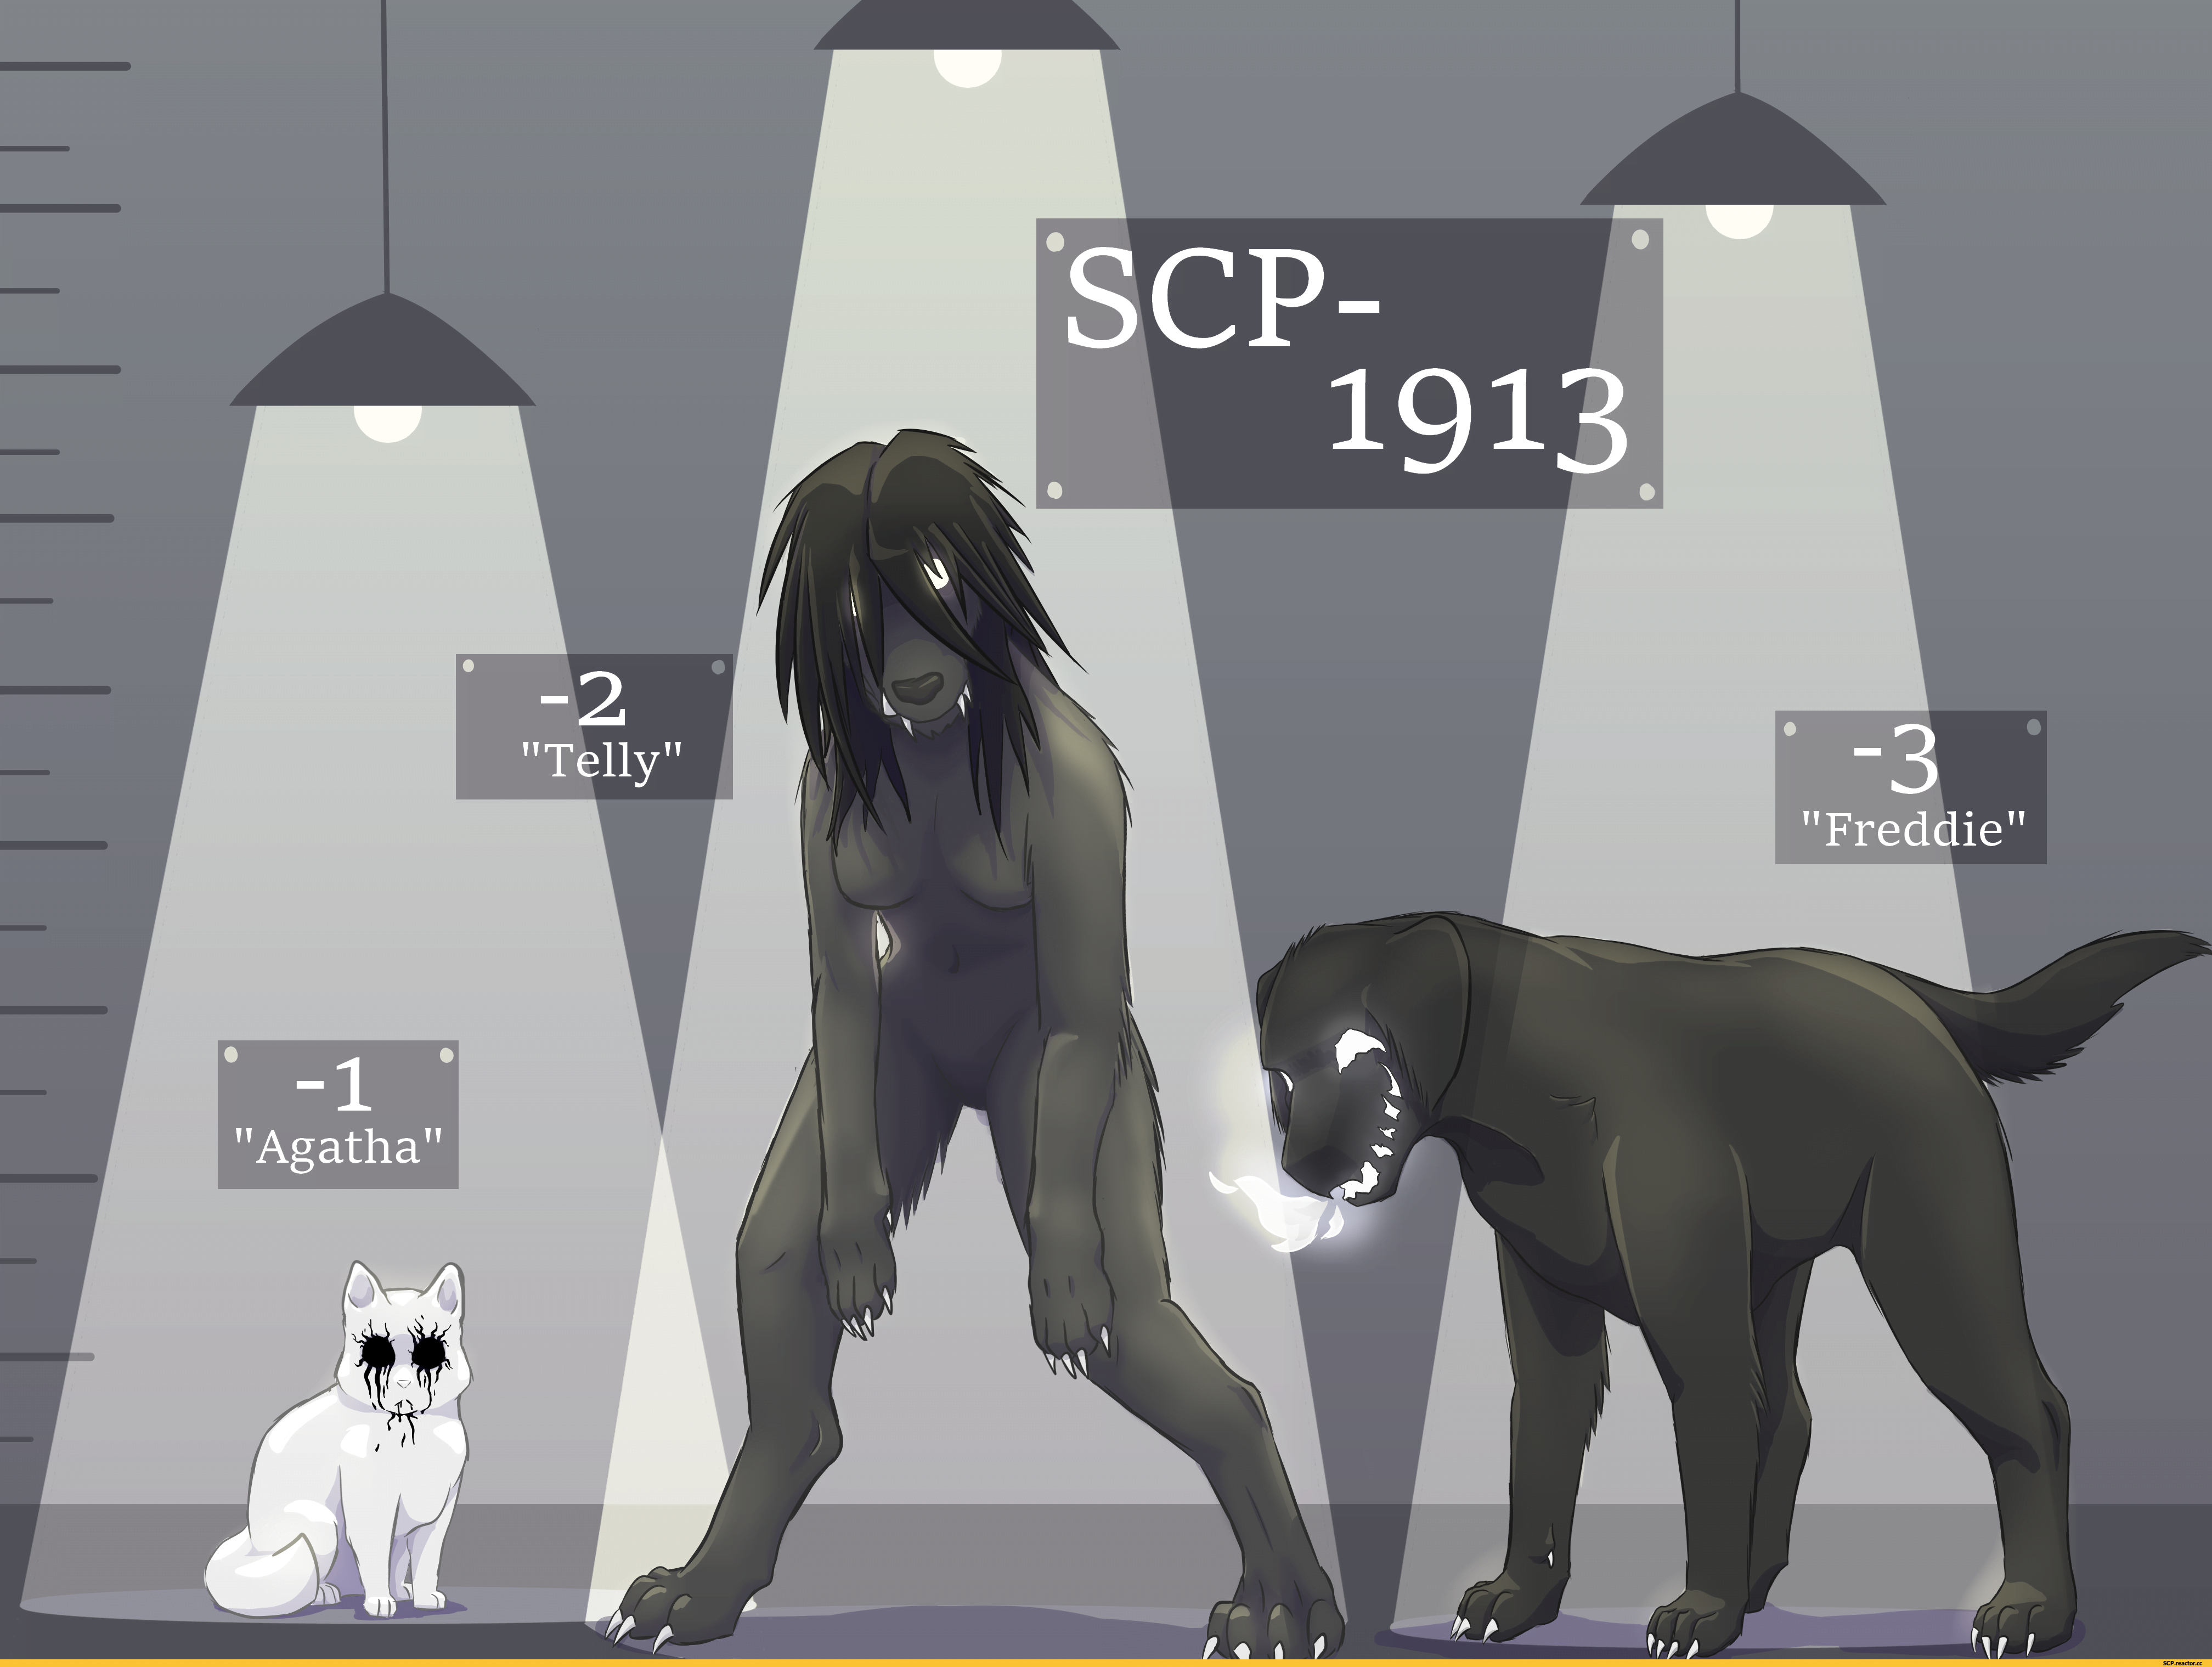 scary pictures -scp = scp 1913 3 - Scp 1913 2 "Telly" 3 "Freddie" 1 "Agatha"